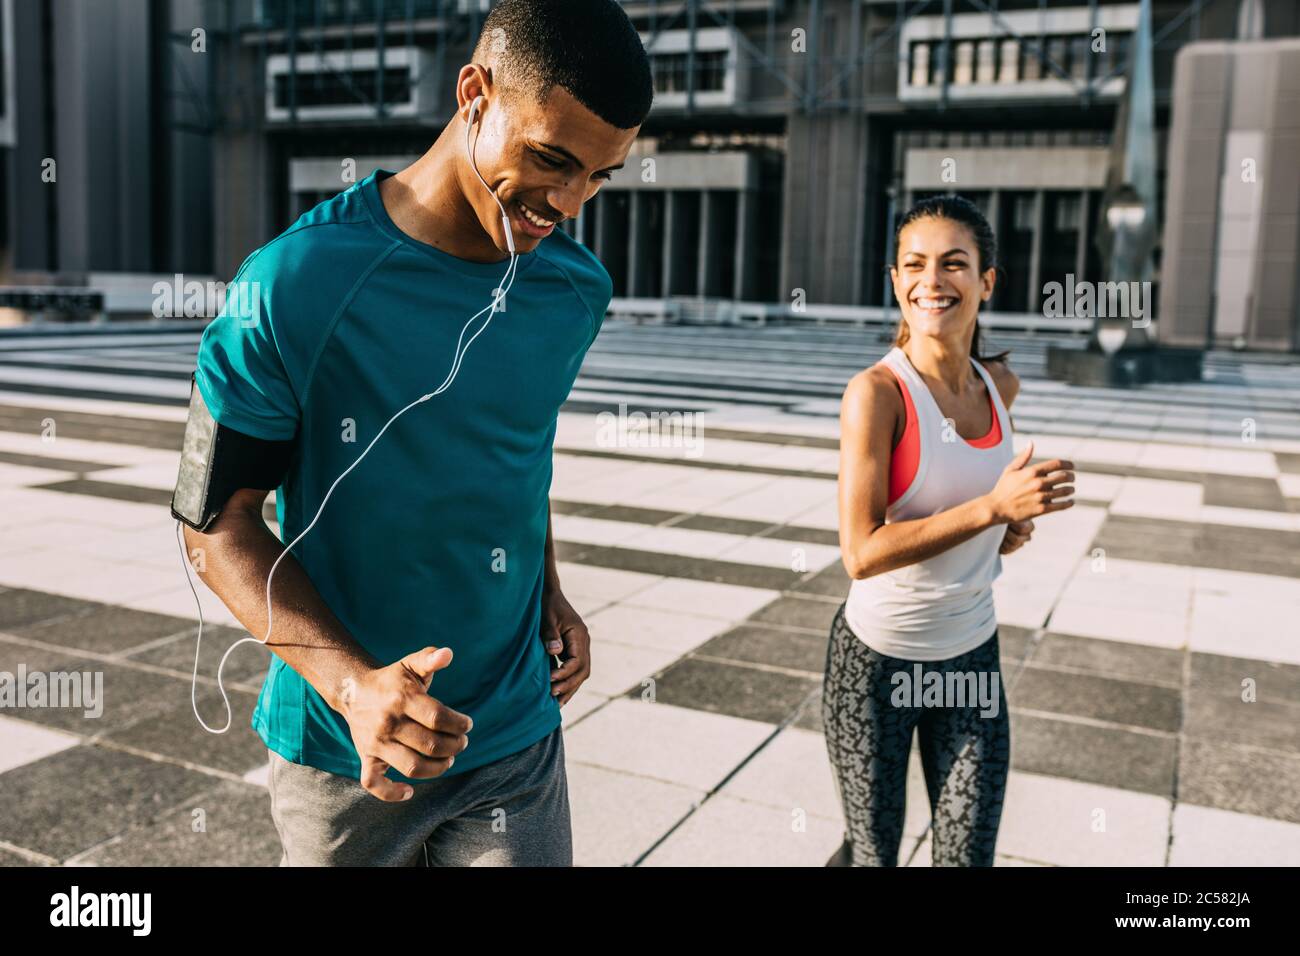 Smiling man and woman on a morning run. Two people in sportswear exercising together in the city. Stock Photo